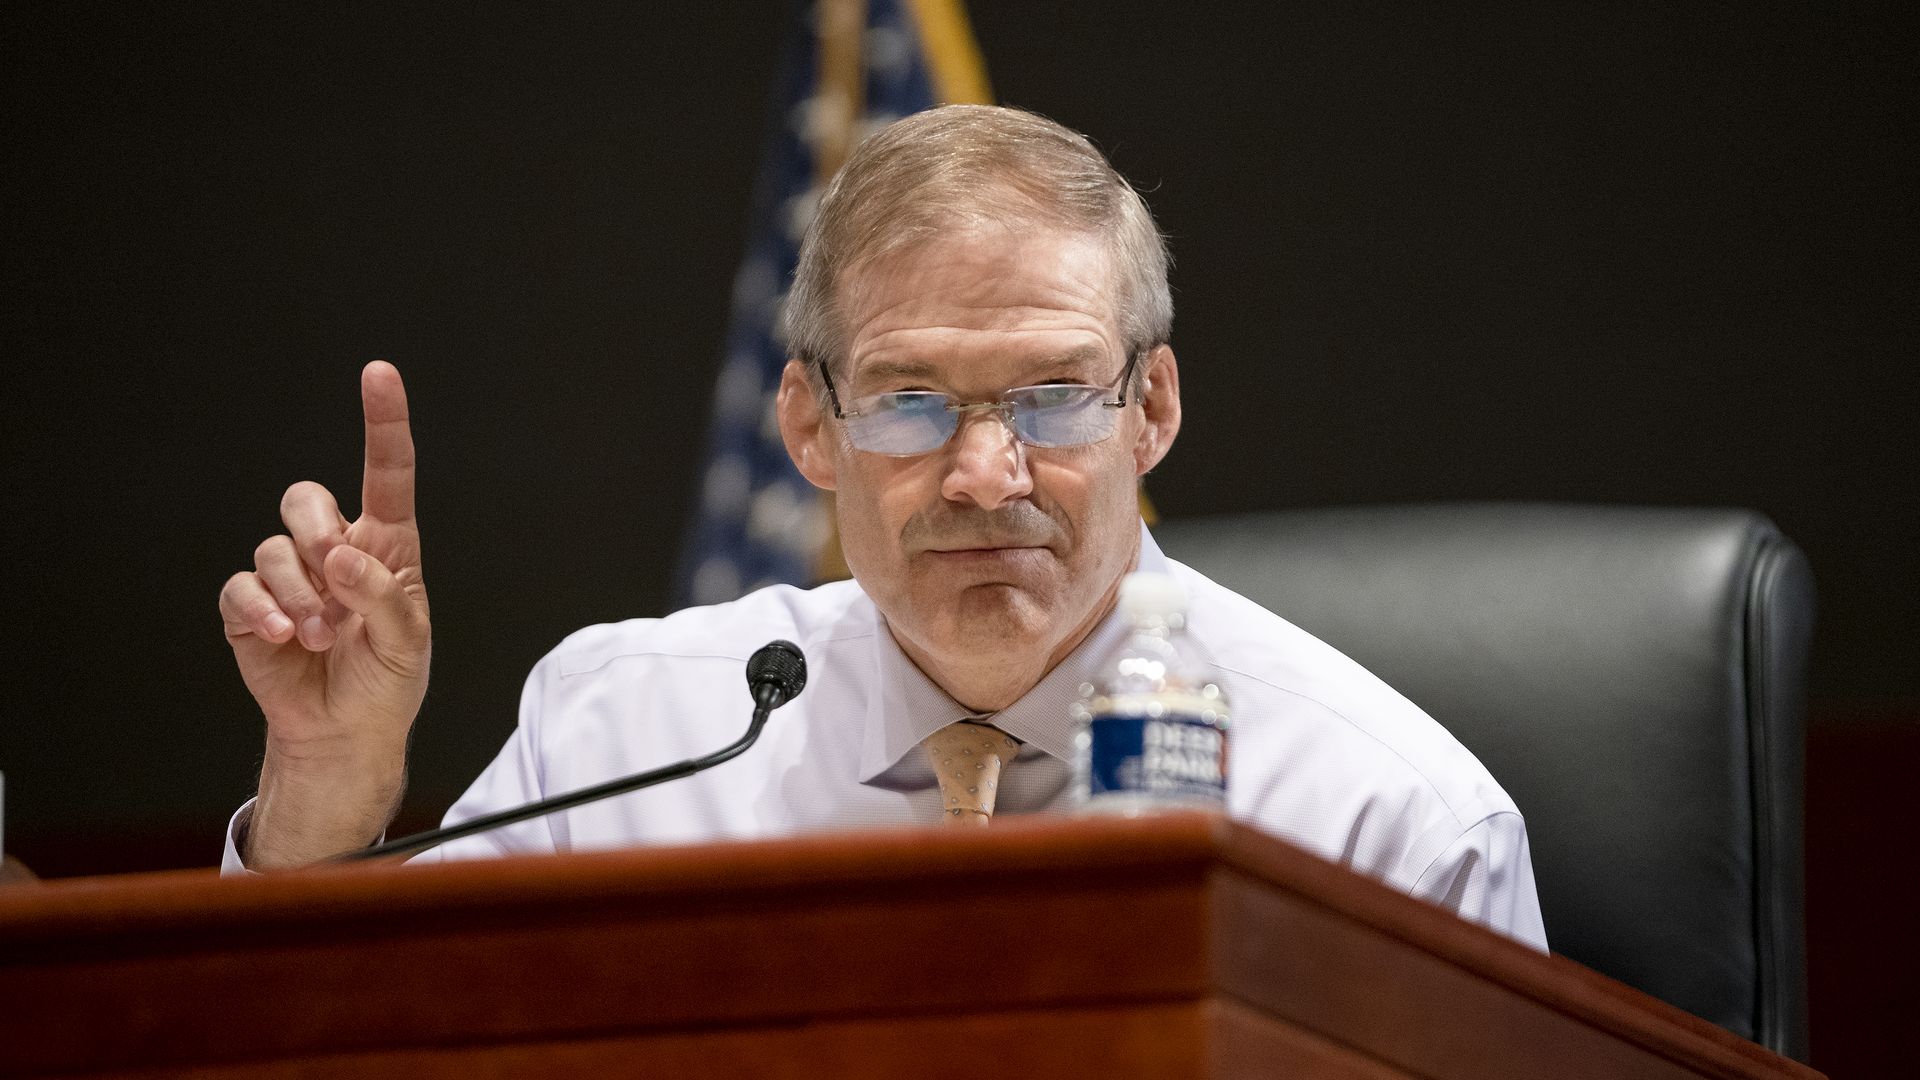  Rep. Jim Jordan  gives an opening statement before U.S. Attorney General Merrick Garland testifies at a House Judiciary Committee hearing at the U.S. Capitol on October 21, 2021 in Washington, DC.